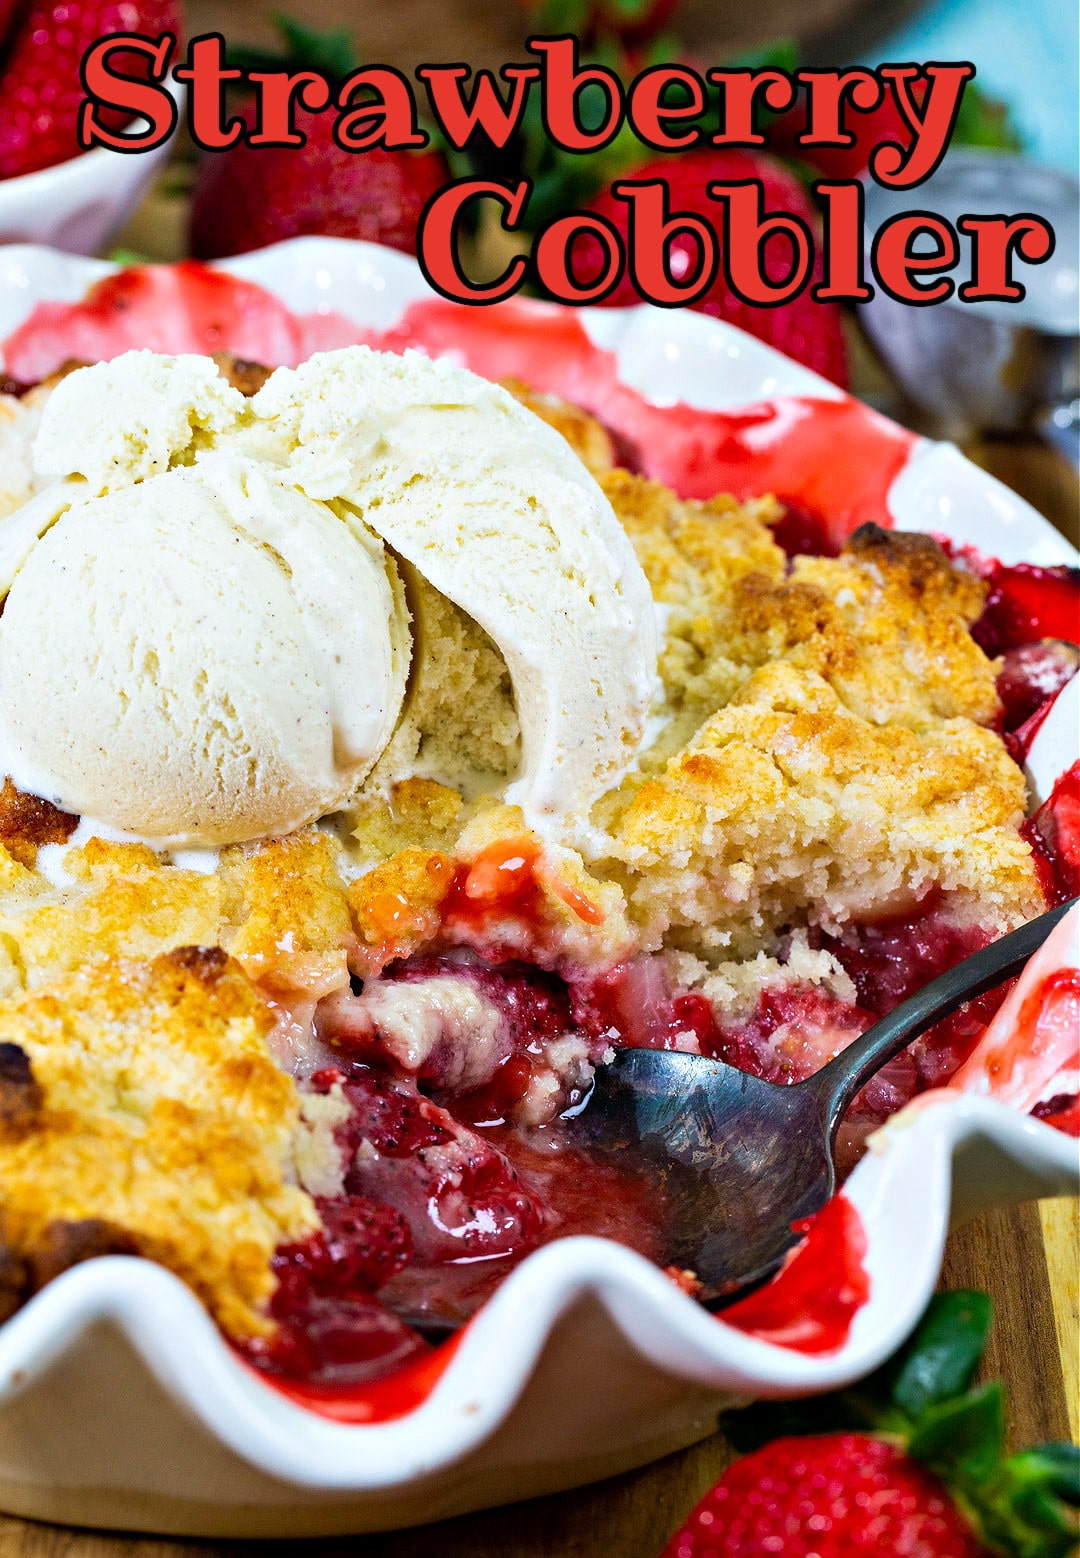 Cobbler with strawberries topped with ice cream.